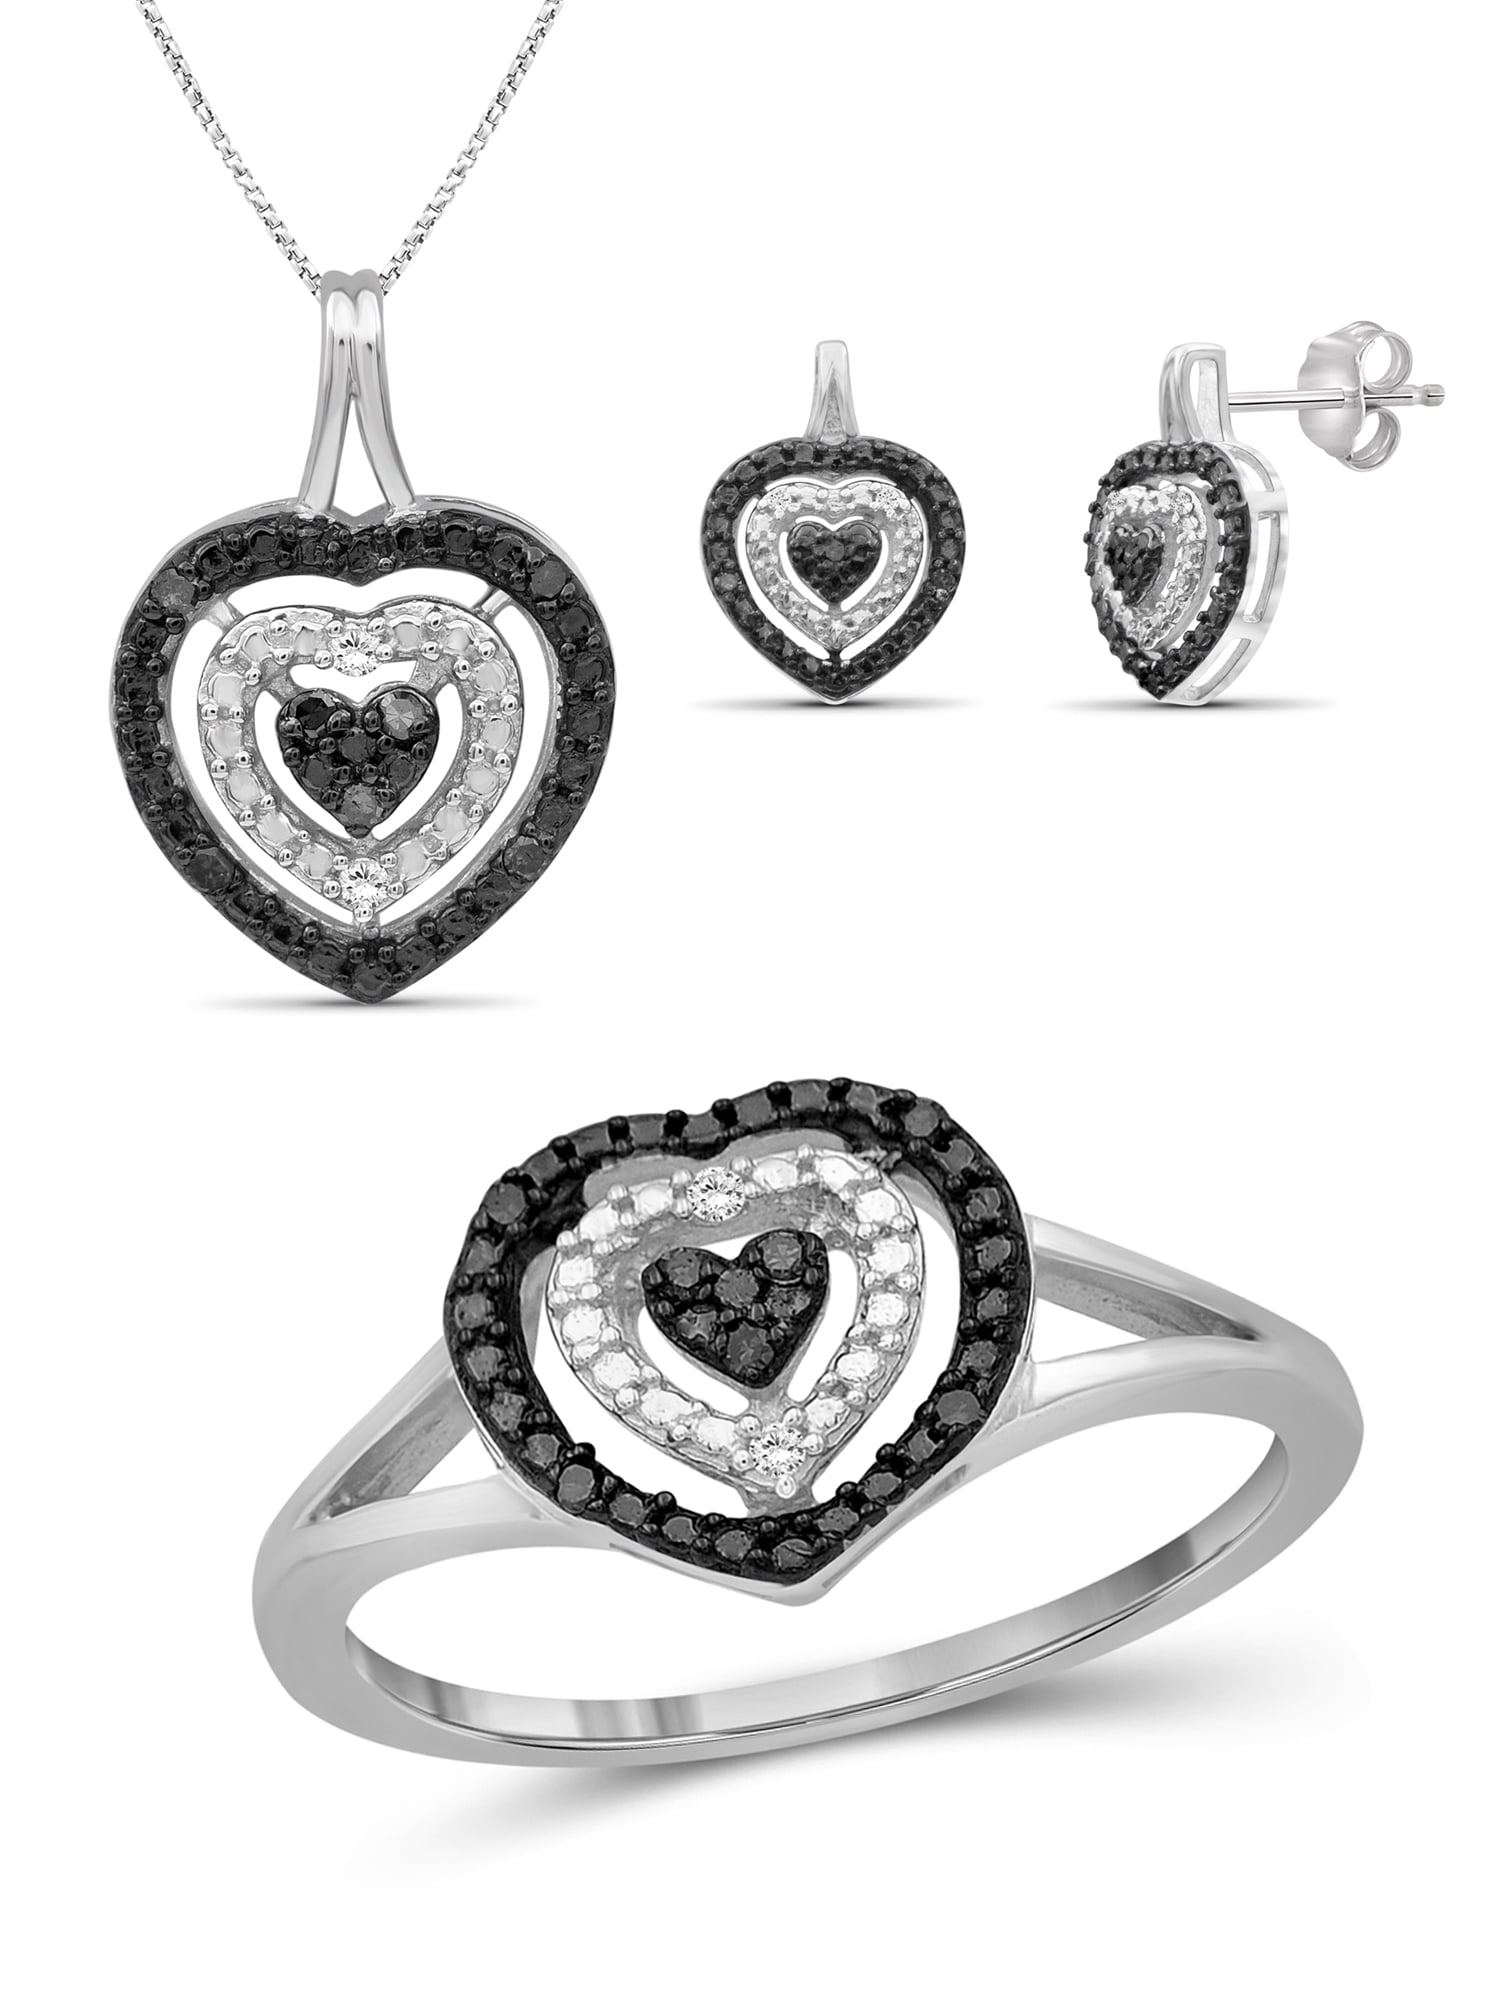 Silver Heart Necklace Earring Set Thank You Present Gift Box Jewellery Ladies 